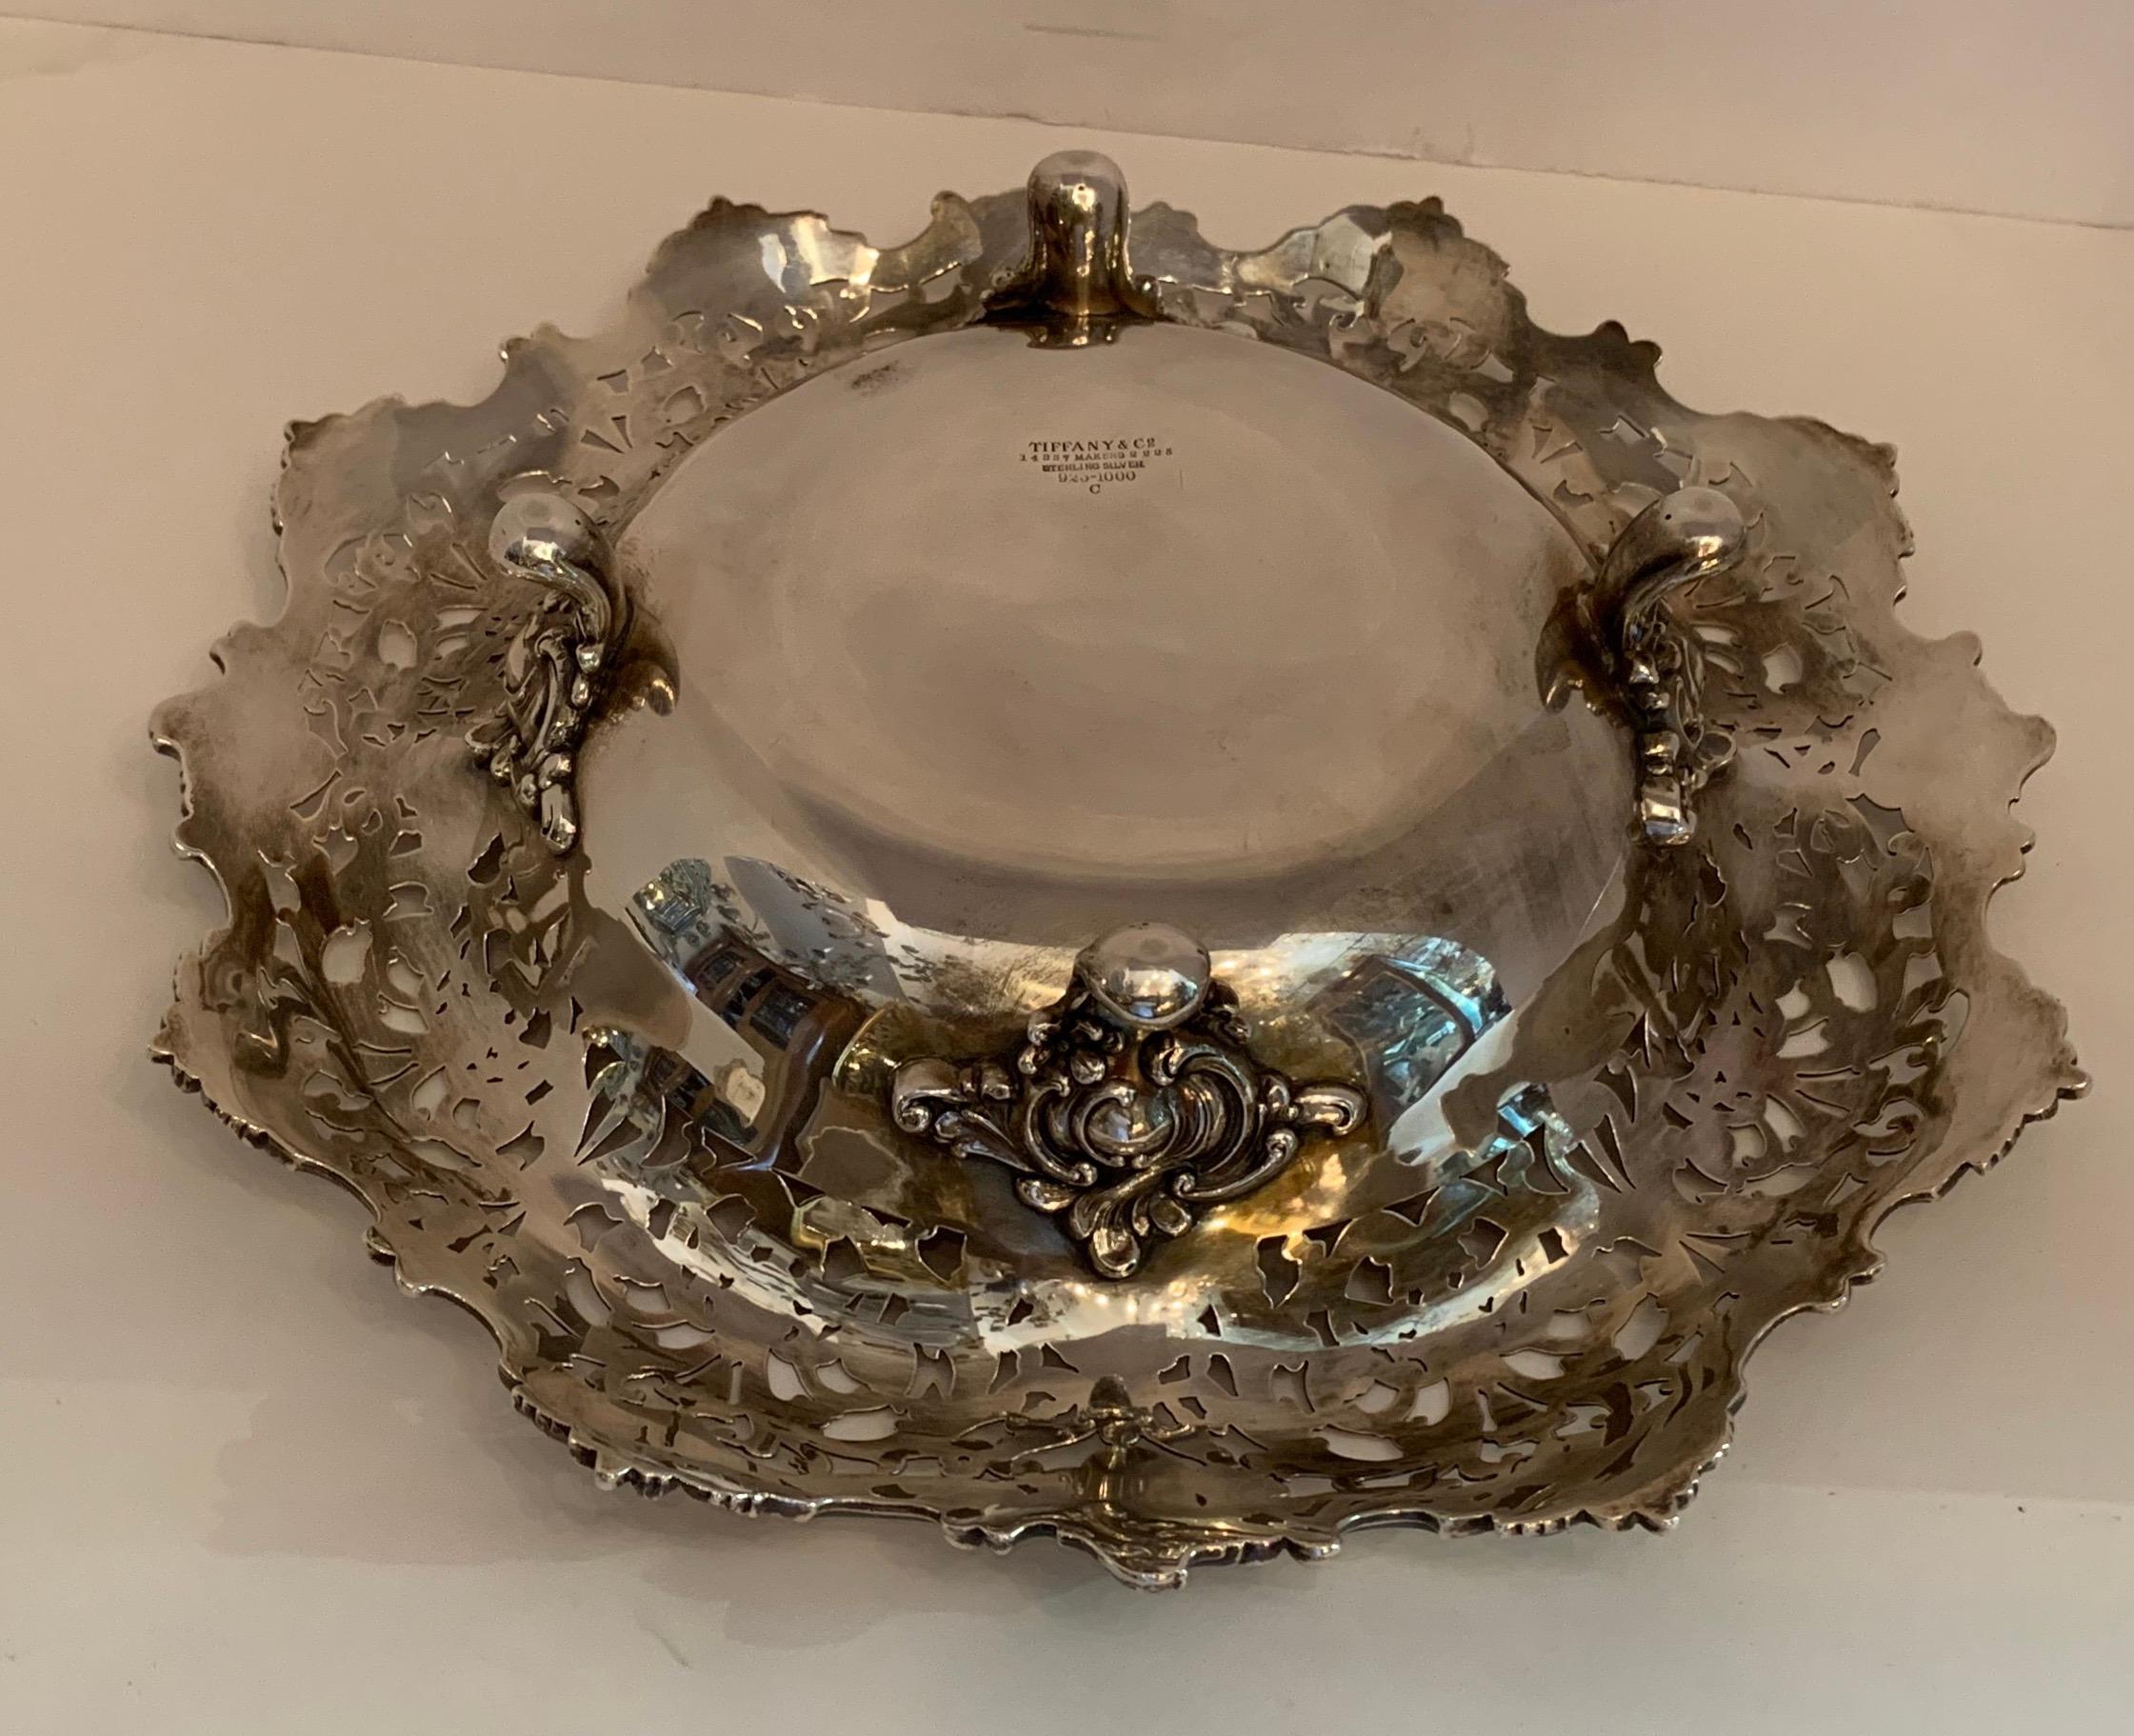 Wonderful Tiffany & Co. Sterling Silver Centerpiece Footed Pierced Bowl For Sale 3